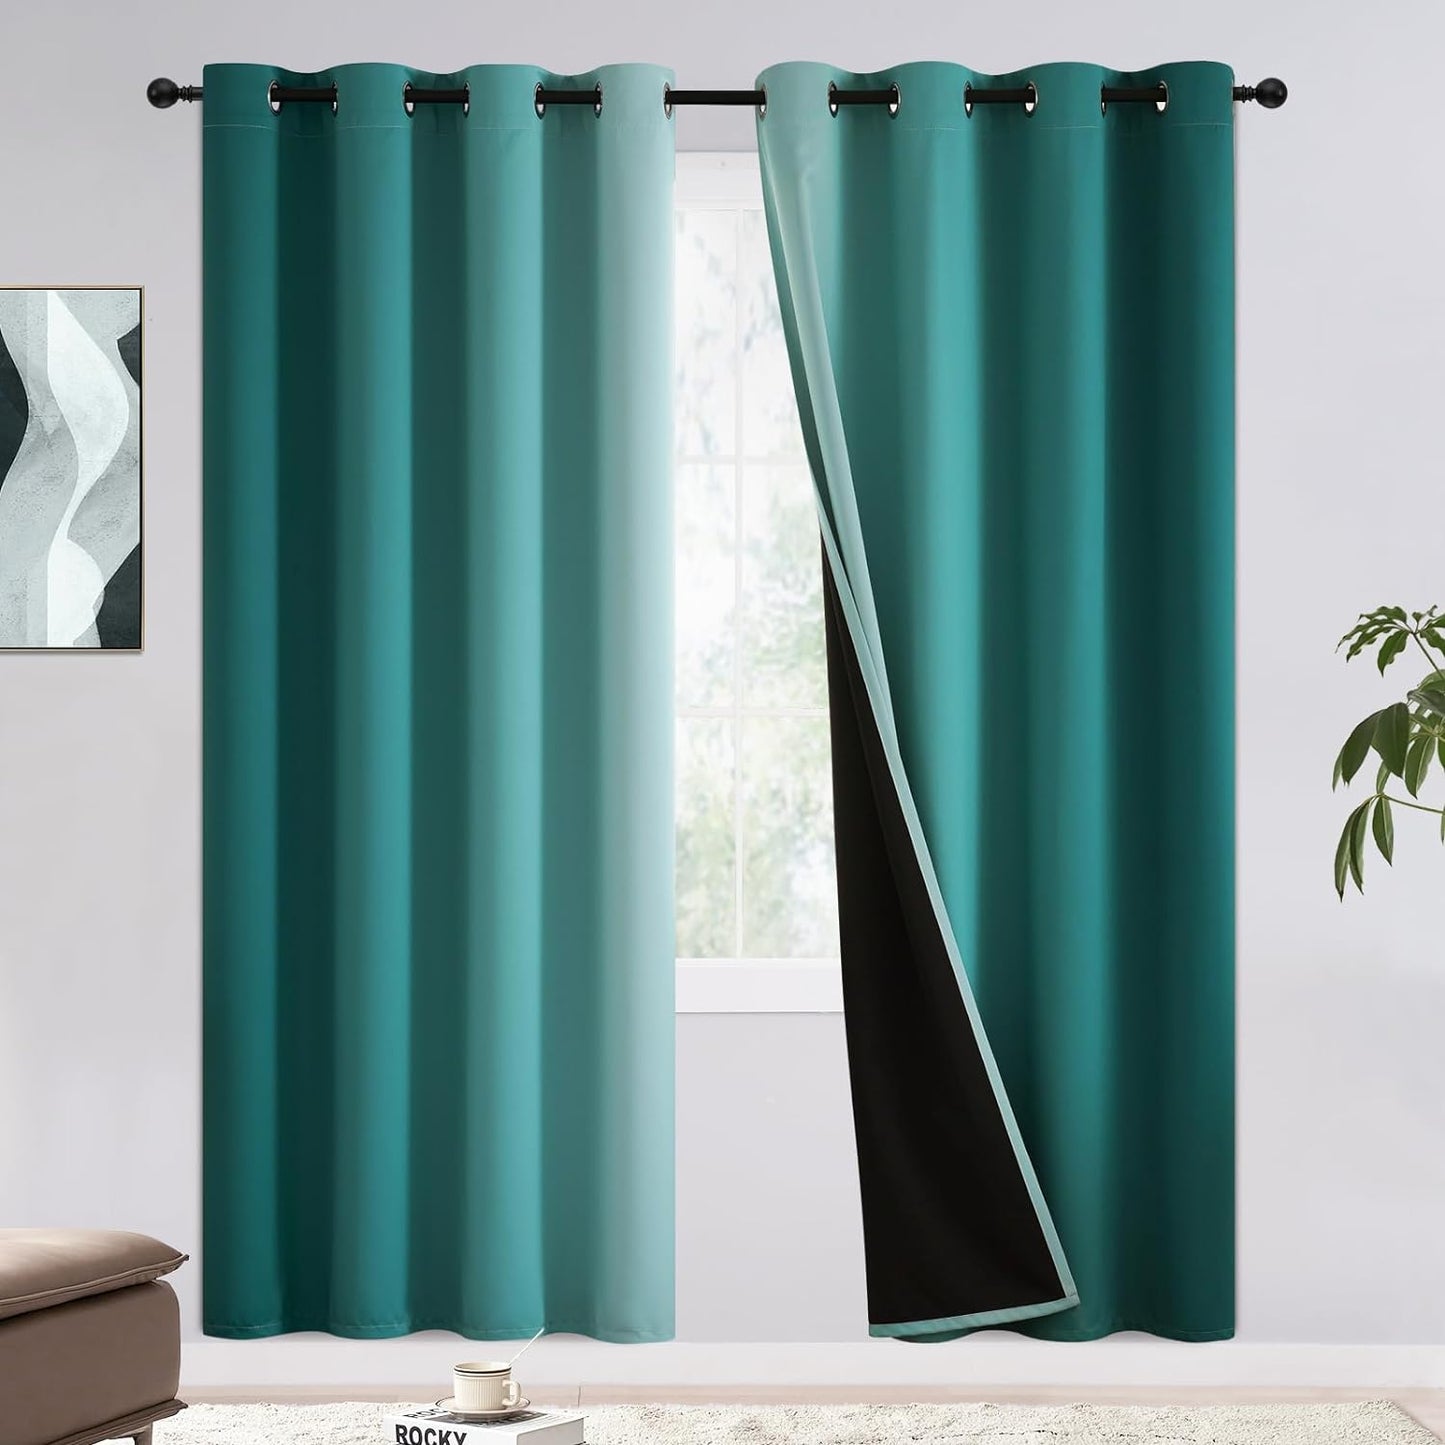 COSVIYA 100% Blackout Curtains & Drapes Ombre Purple Curtains 63 Inch Length 2 Panels,Full Room Darkening Grommet Gradient Insulated Thermal Window Curtains for Bedroom/Living Room,52X63 Inches  COSVIYA Teal To Greyish White 52W X 72L 